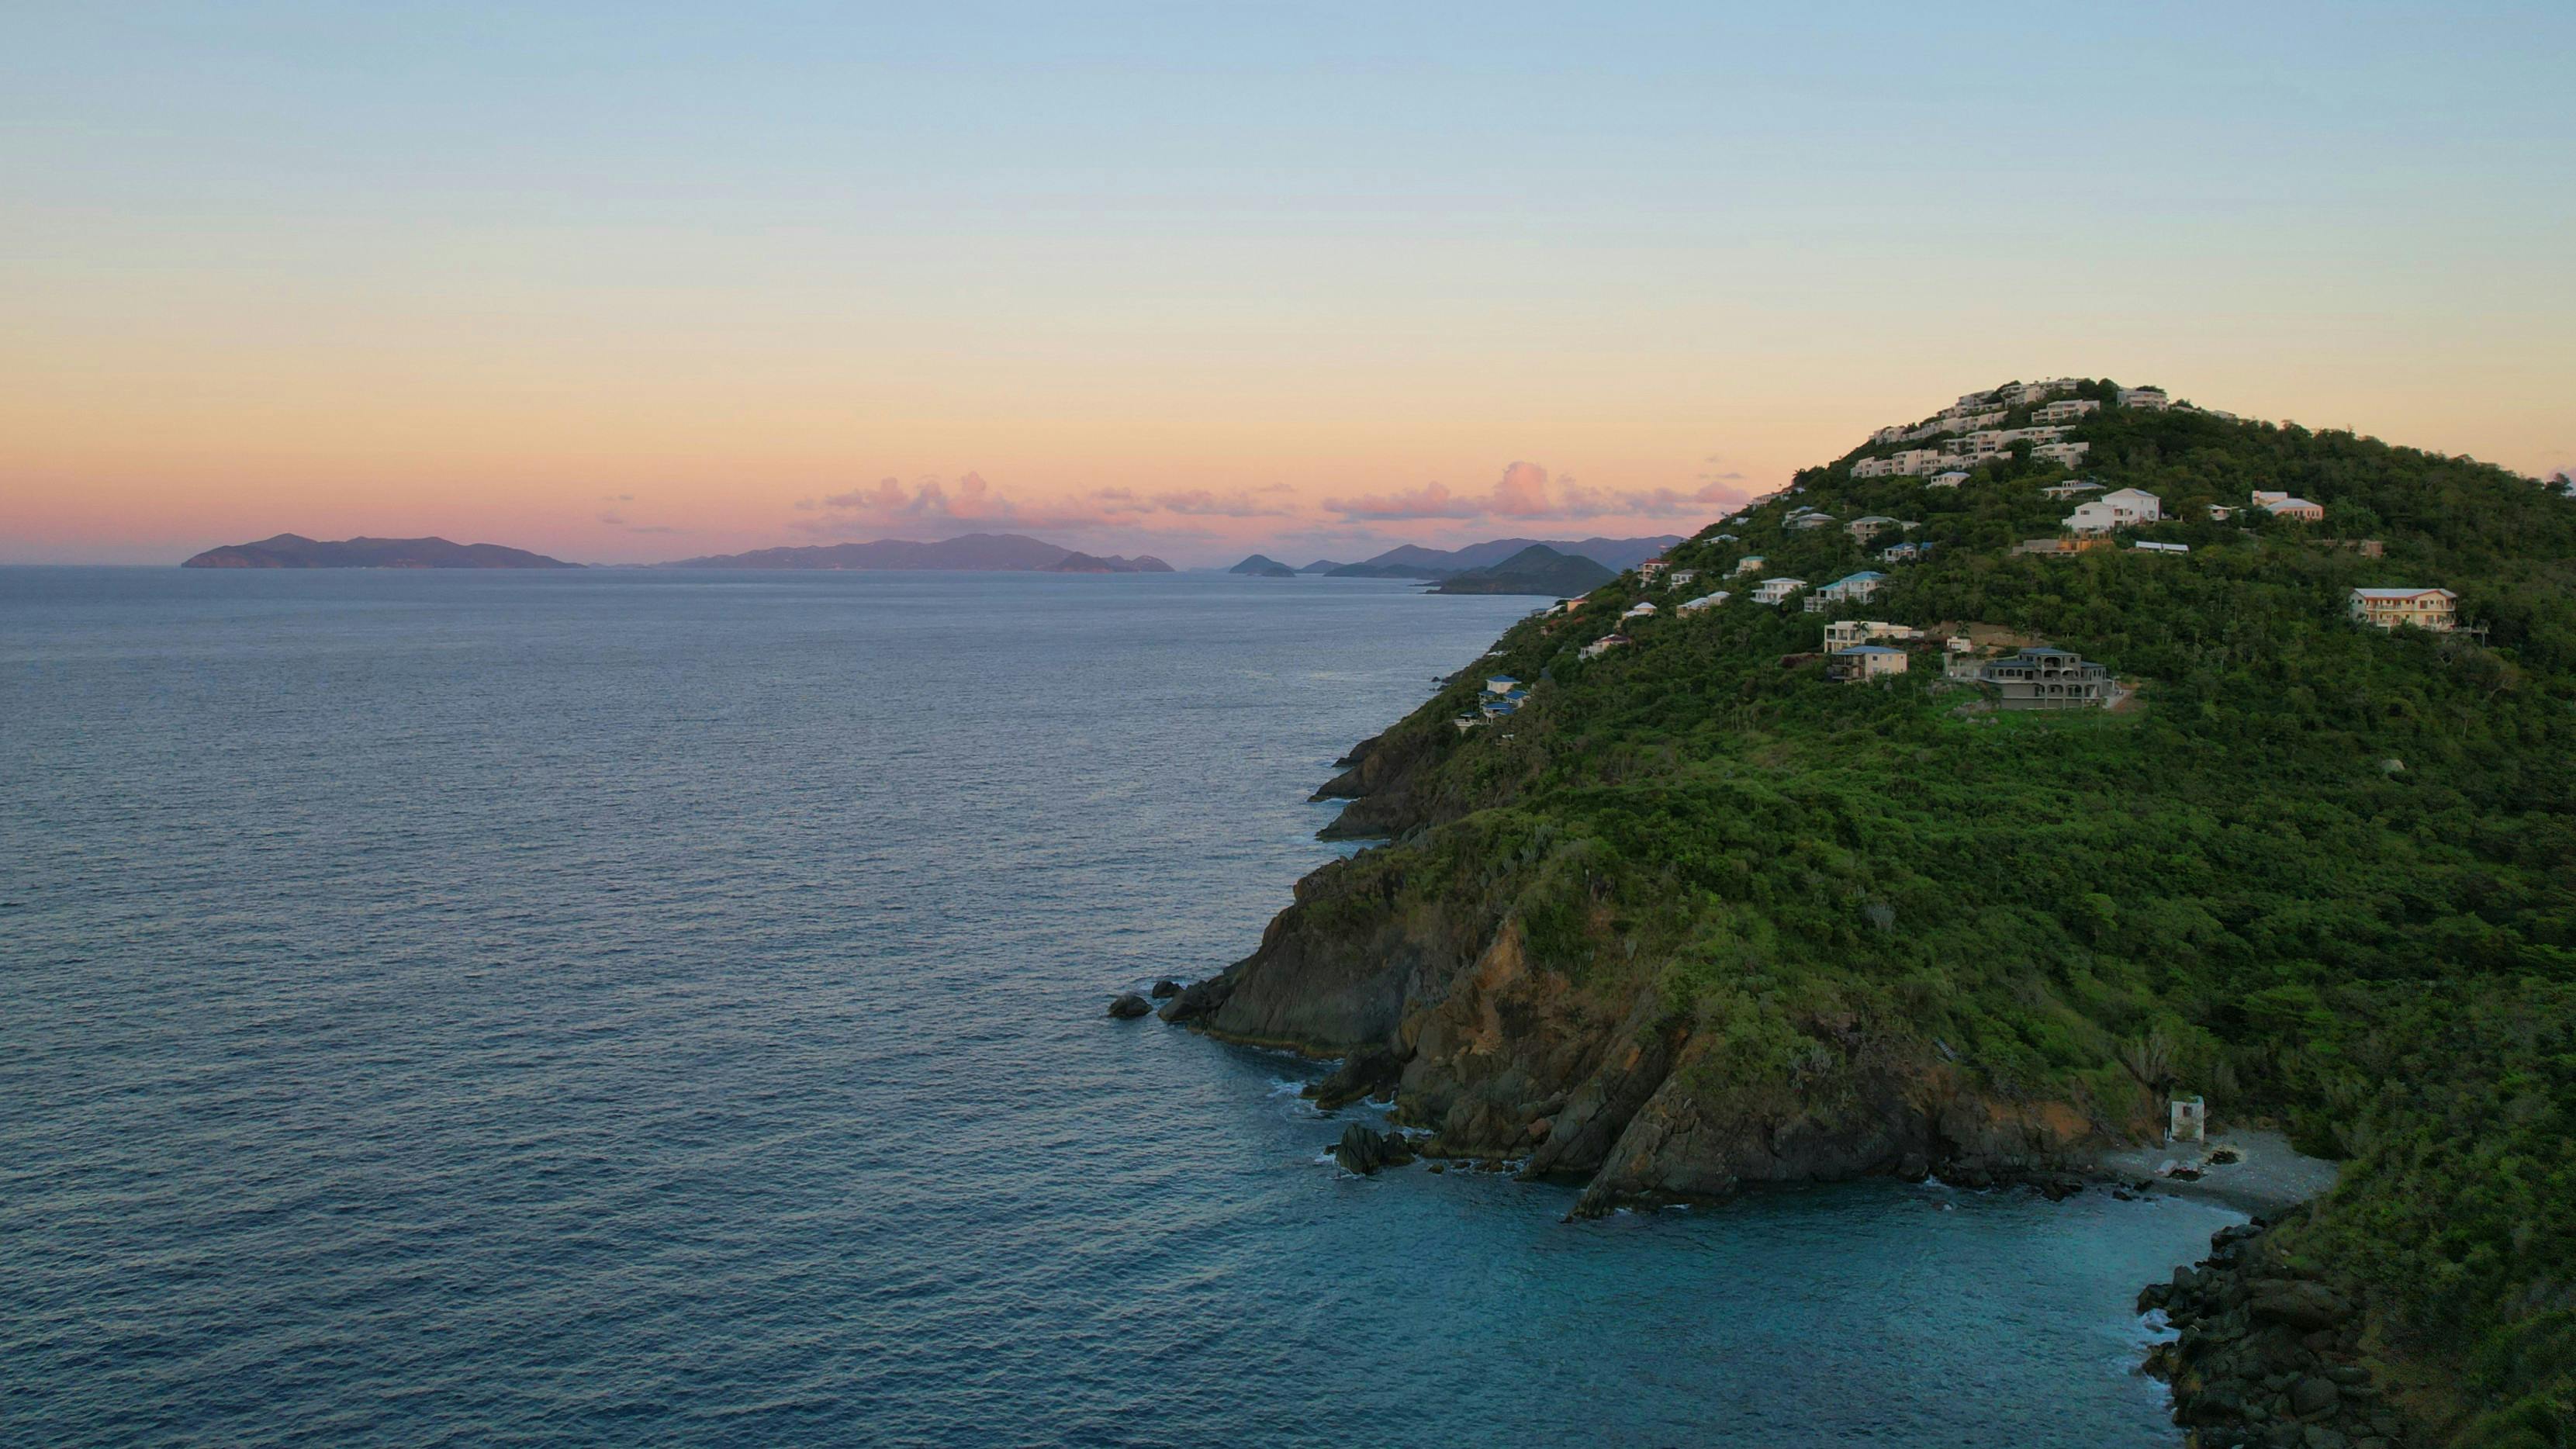 The view looking towards BVI over Lovenlund Bay, St Thomas